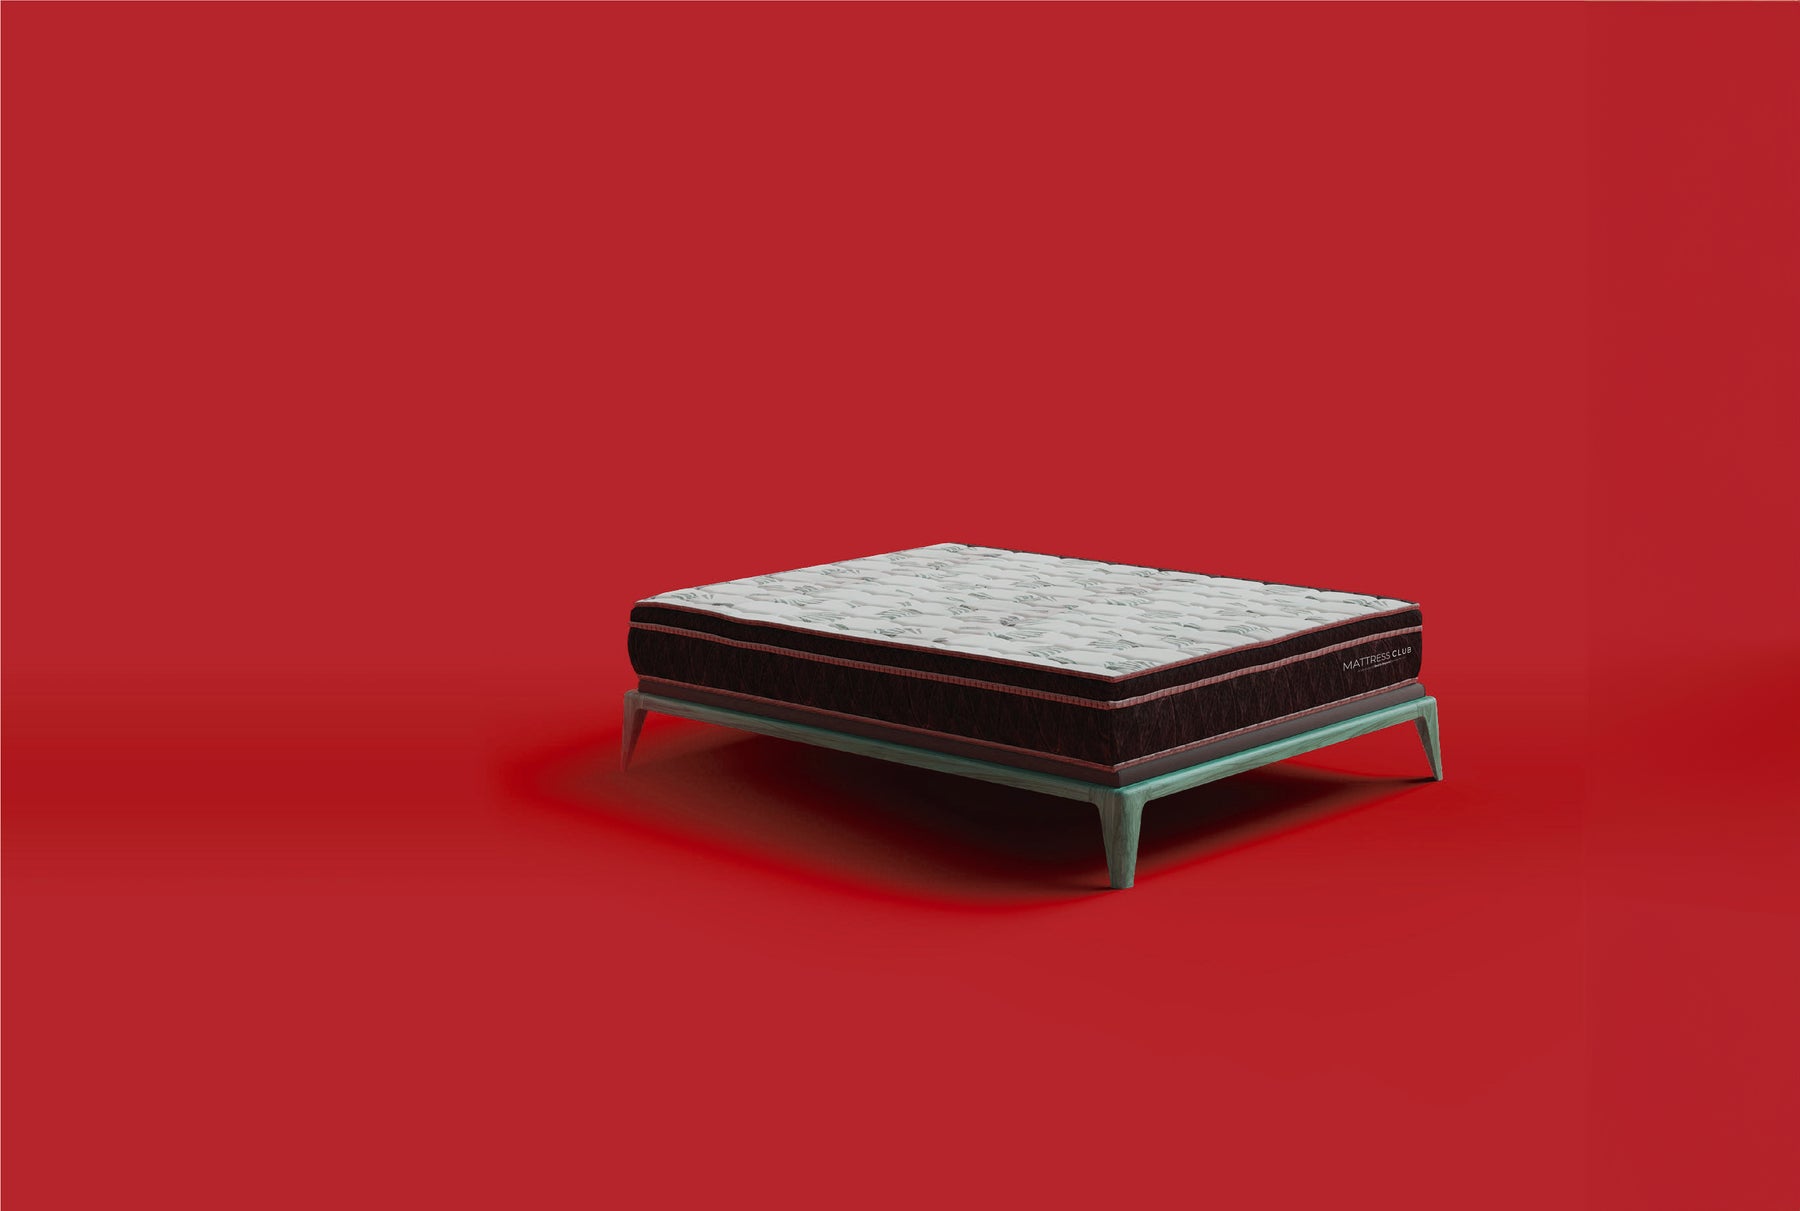 Top 5 Mattresses for You  Based on Your Sleeping Position & Body Weight